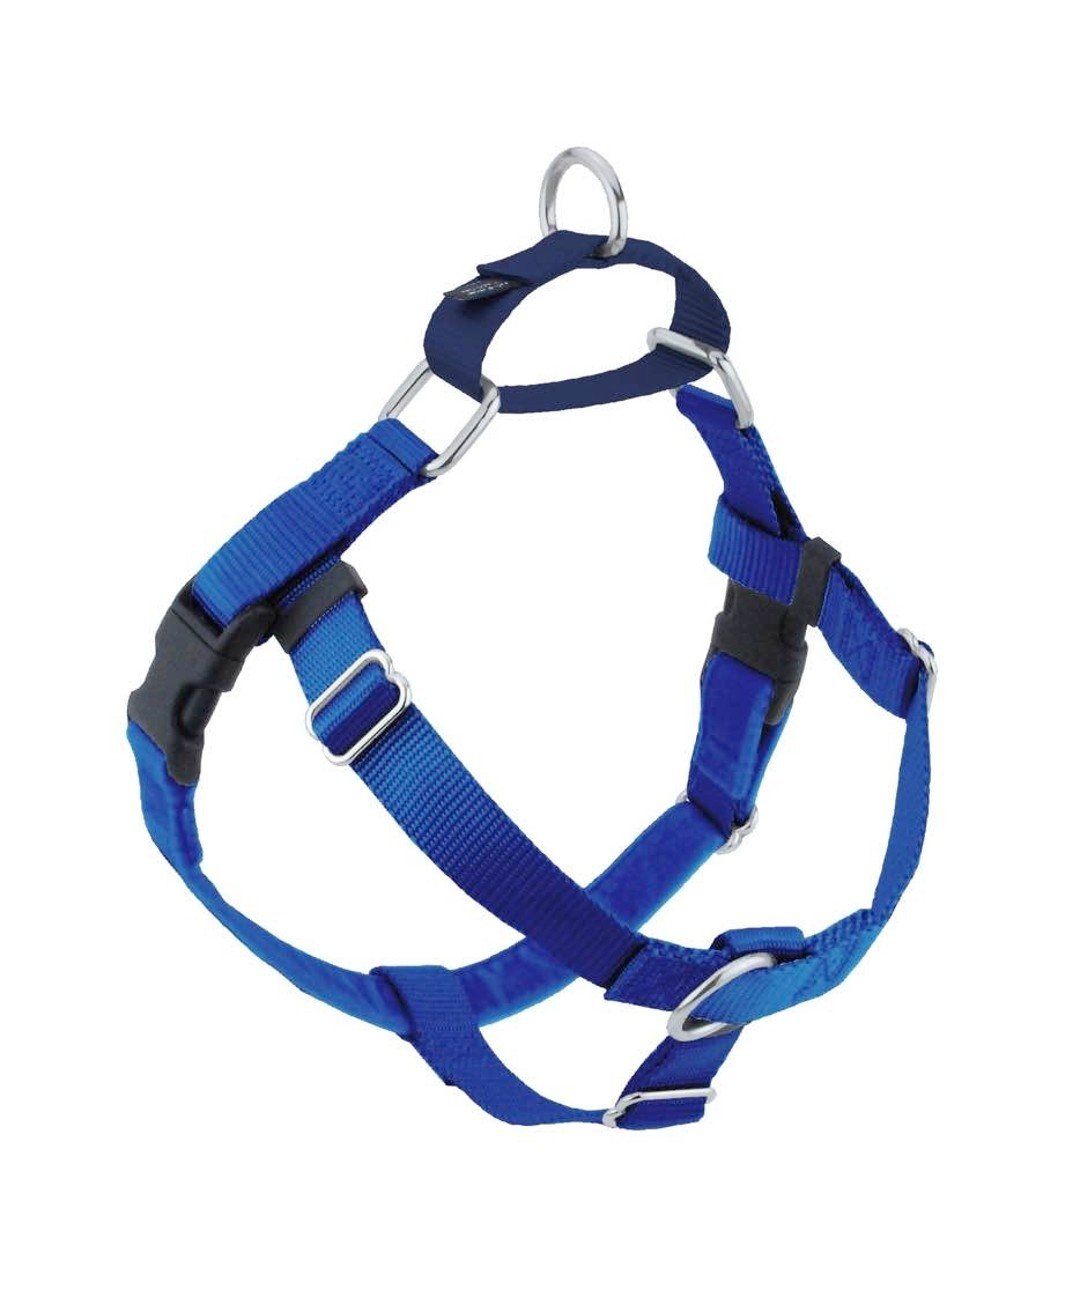 2 Hounds Freedom No-Pull Dog Harness Harness Rover XS Blue 